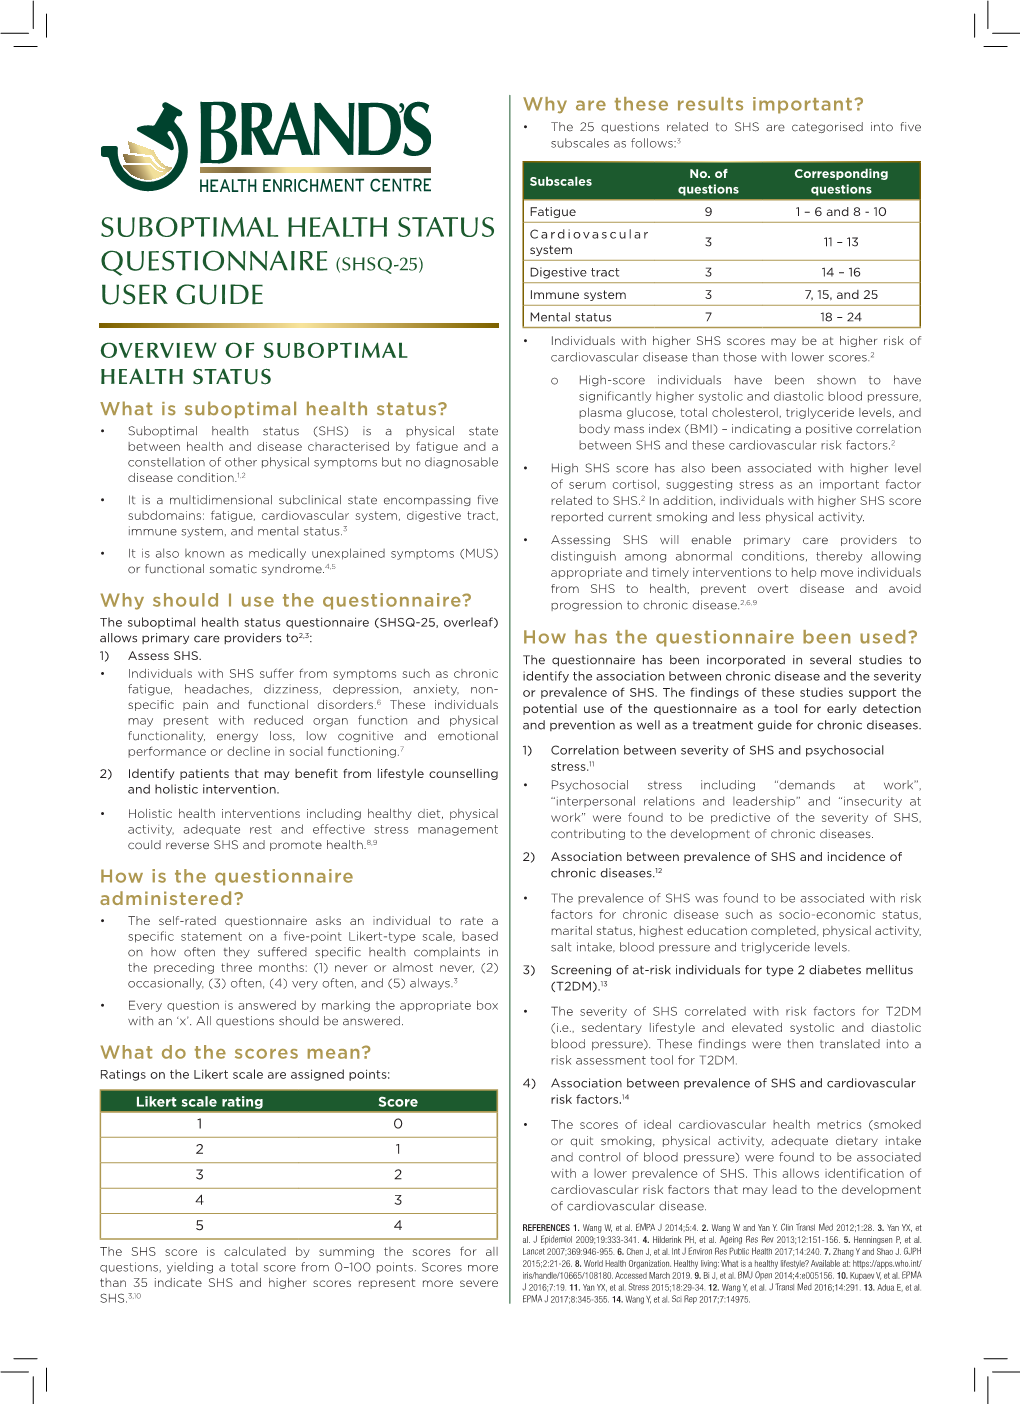 Suboptimal Health Status Questionnaire (SHSQ-25, Overleaf) Allows Primary Care Providers To2,3: How Has the Questionnaire Been Used? 1) Assess SHS